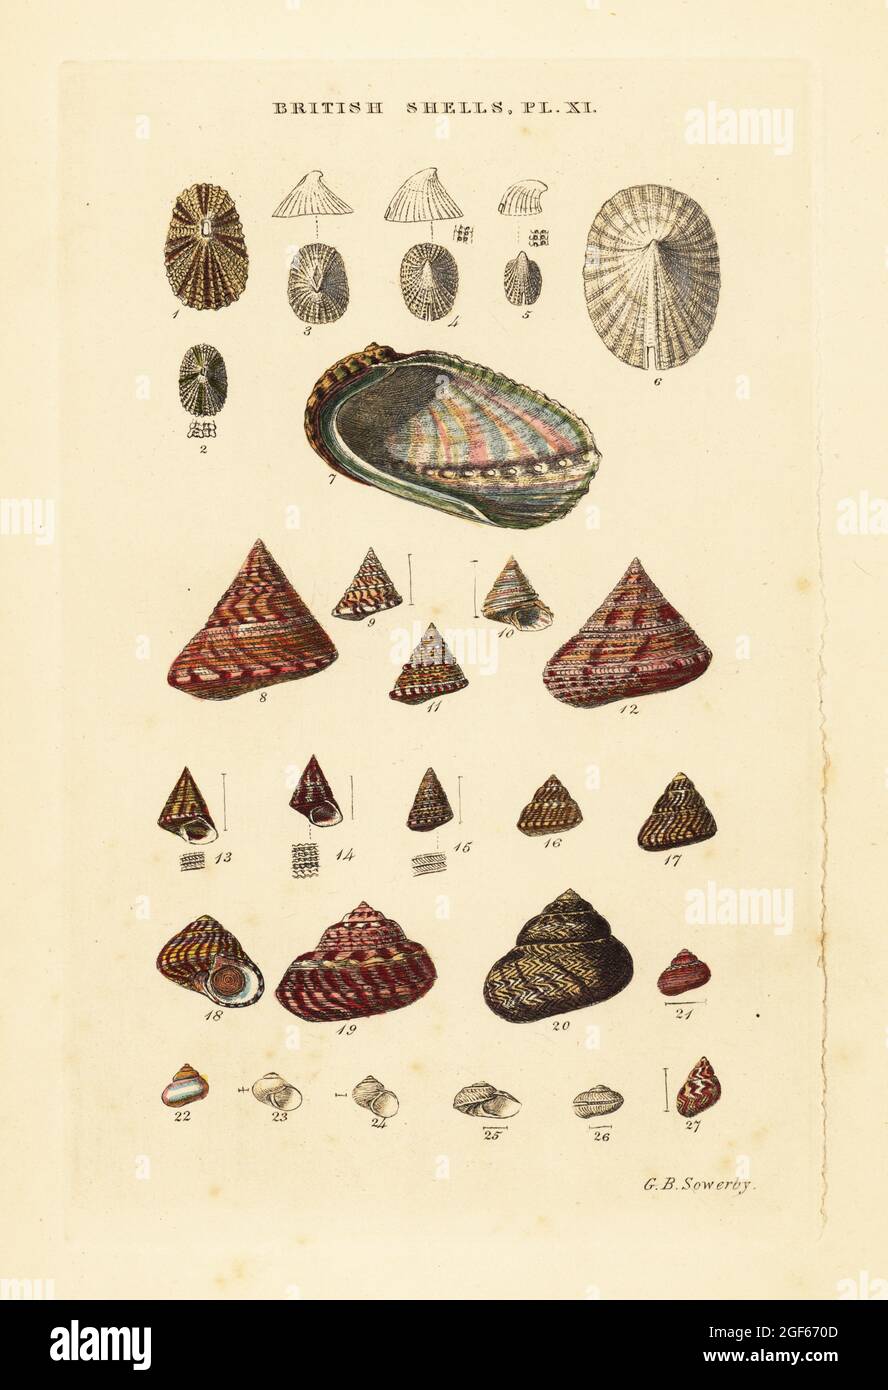 Ear shell, Haliotis vulgaris, sea snails, Trochus, Margarita, etc. Handcoloured copperplate engraving by George Brettingham Sowerby from his own Illustrated Index of British Shells, Sowerby and Simpkin, Marshall & Co., London, 1859. George Brettingham Sowerby II (1812-1884), British naturalist, illustrator, and conchologist. Stock Photo